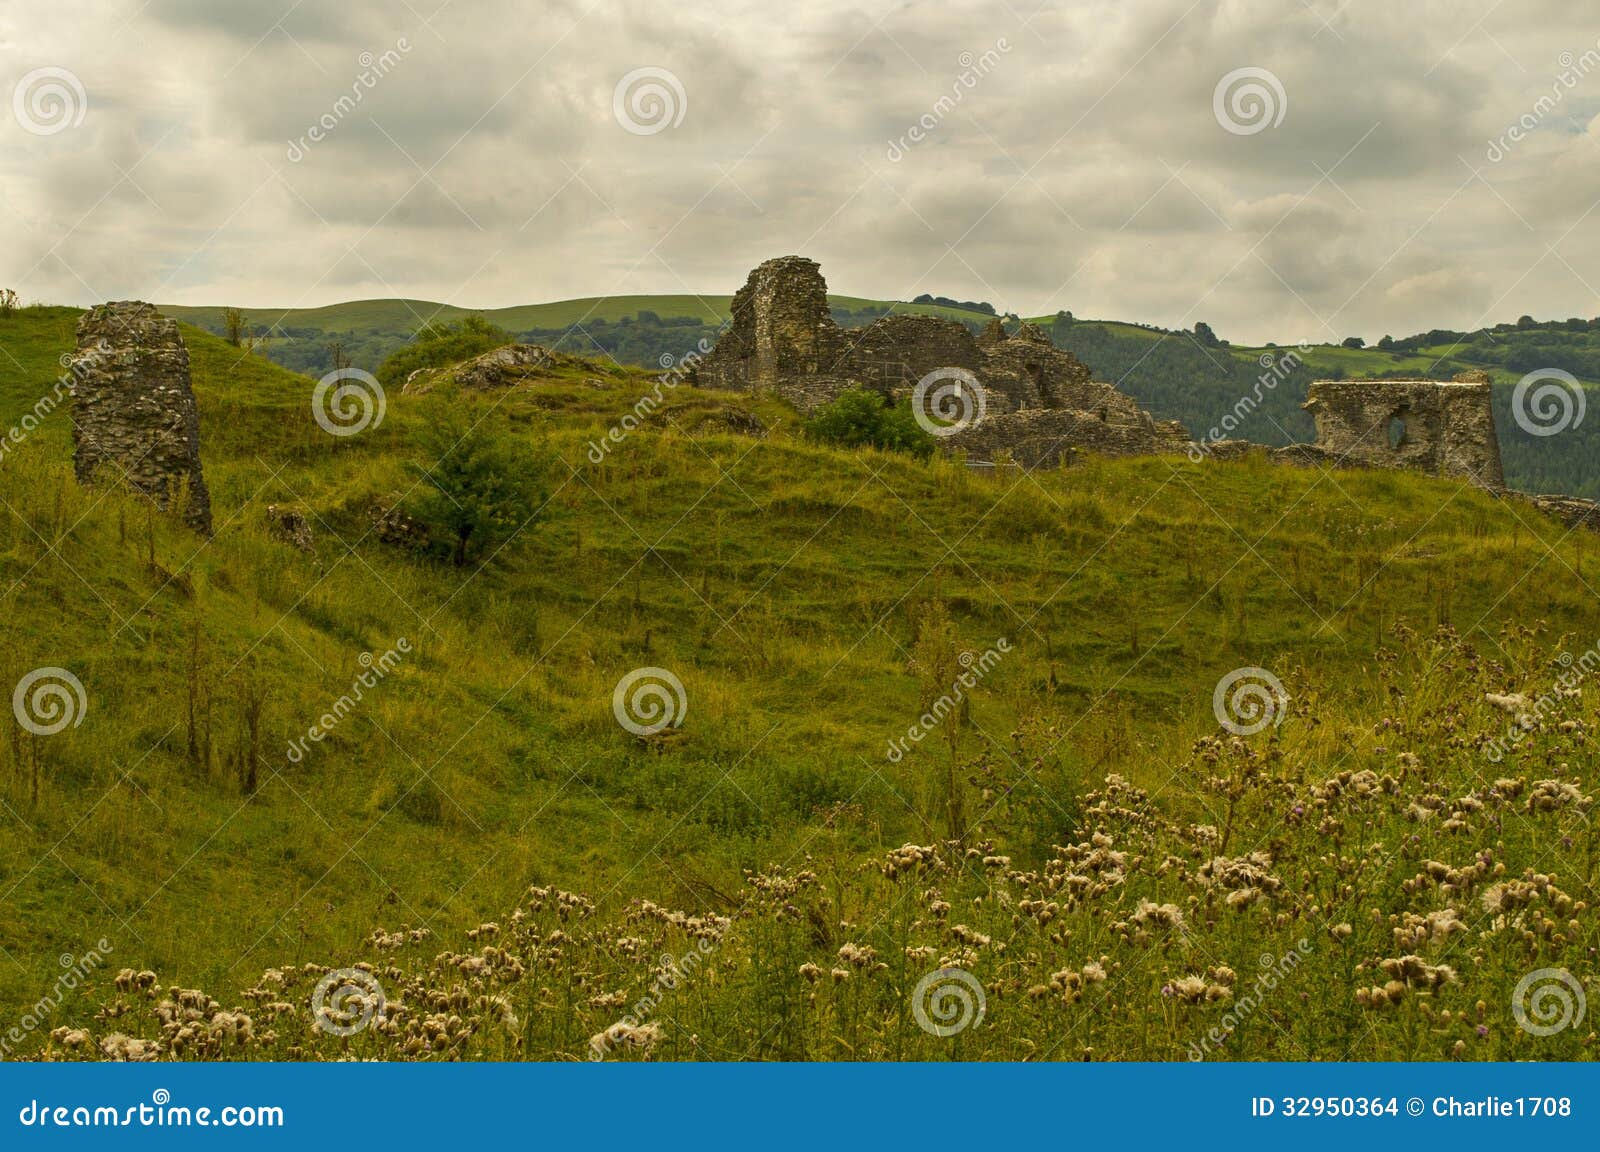 Dryslwyn castle. This is an image of the hilltop castle in carmarthenshire